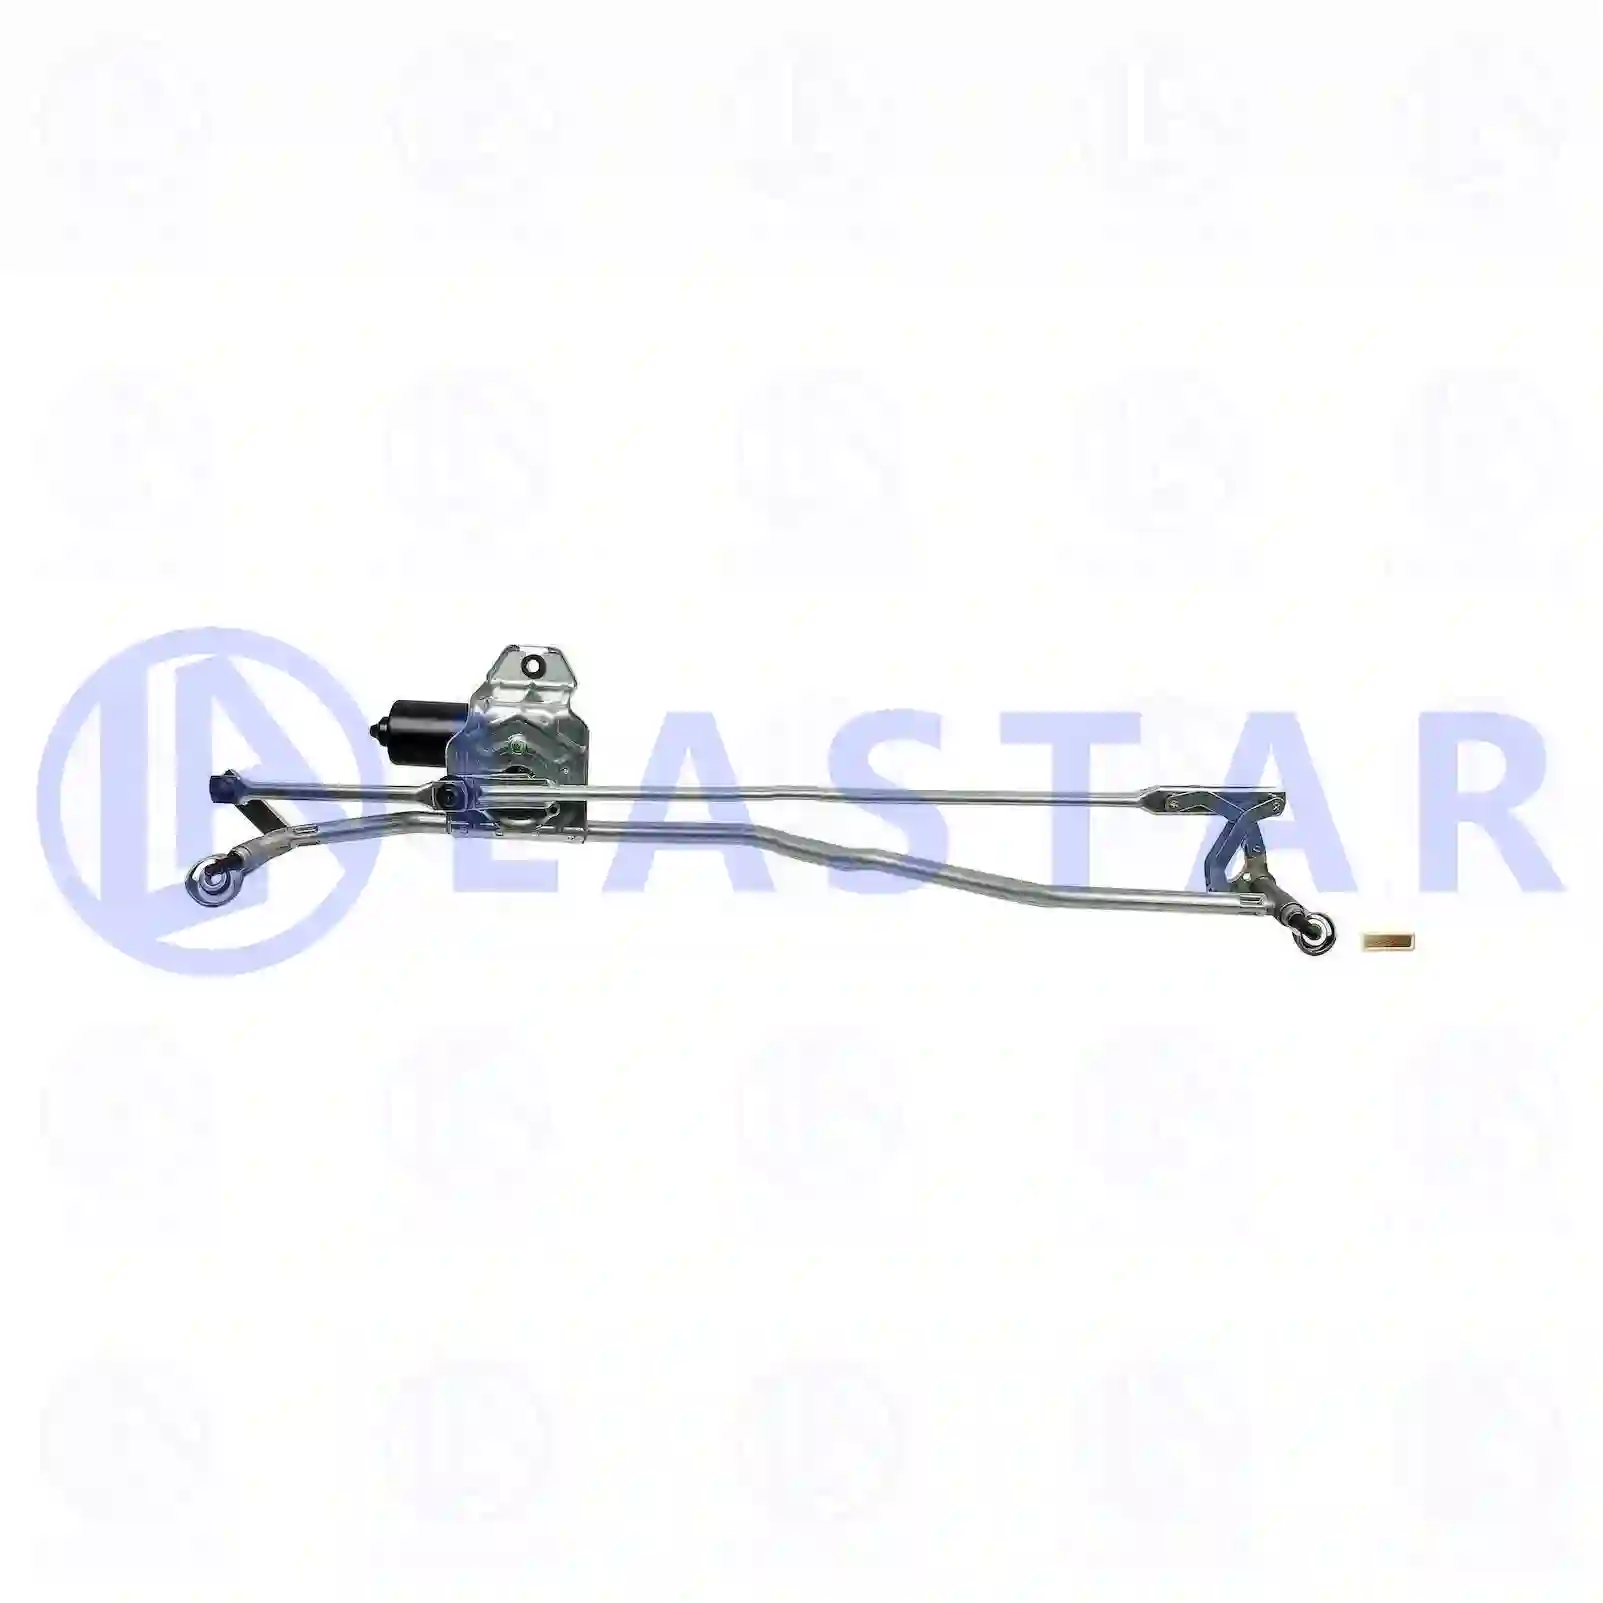 Wiper linkage, complete, with wiper motor, 77719469, 9738200181 ||  77719469 Lastar Spare Part | Truck Spare Parts, Auotomotive Spare Parts Wiper linkage, complete, with wiper motor, 77719469, 9738200181 ||  77719469 Lastar Spare Part | Truck Spare Parts, Auotomotive Spare Parts